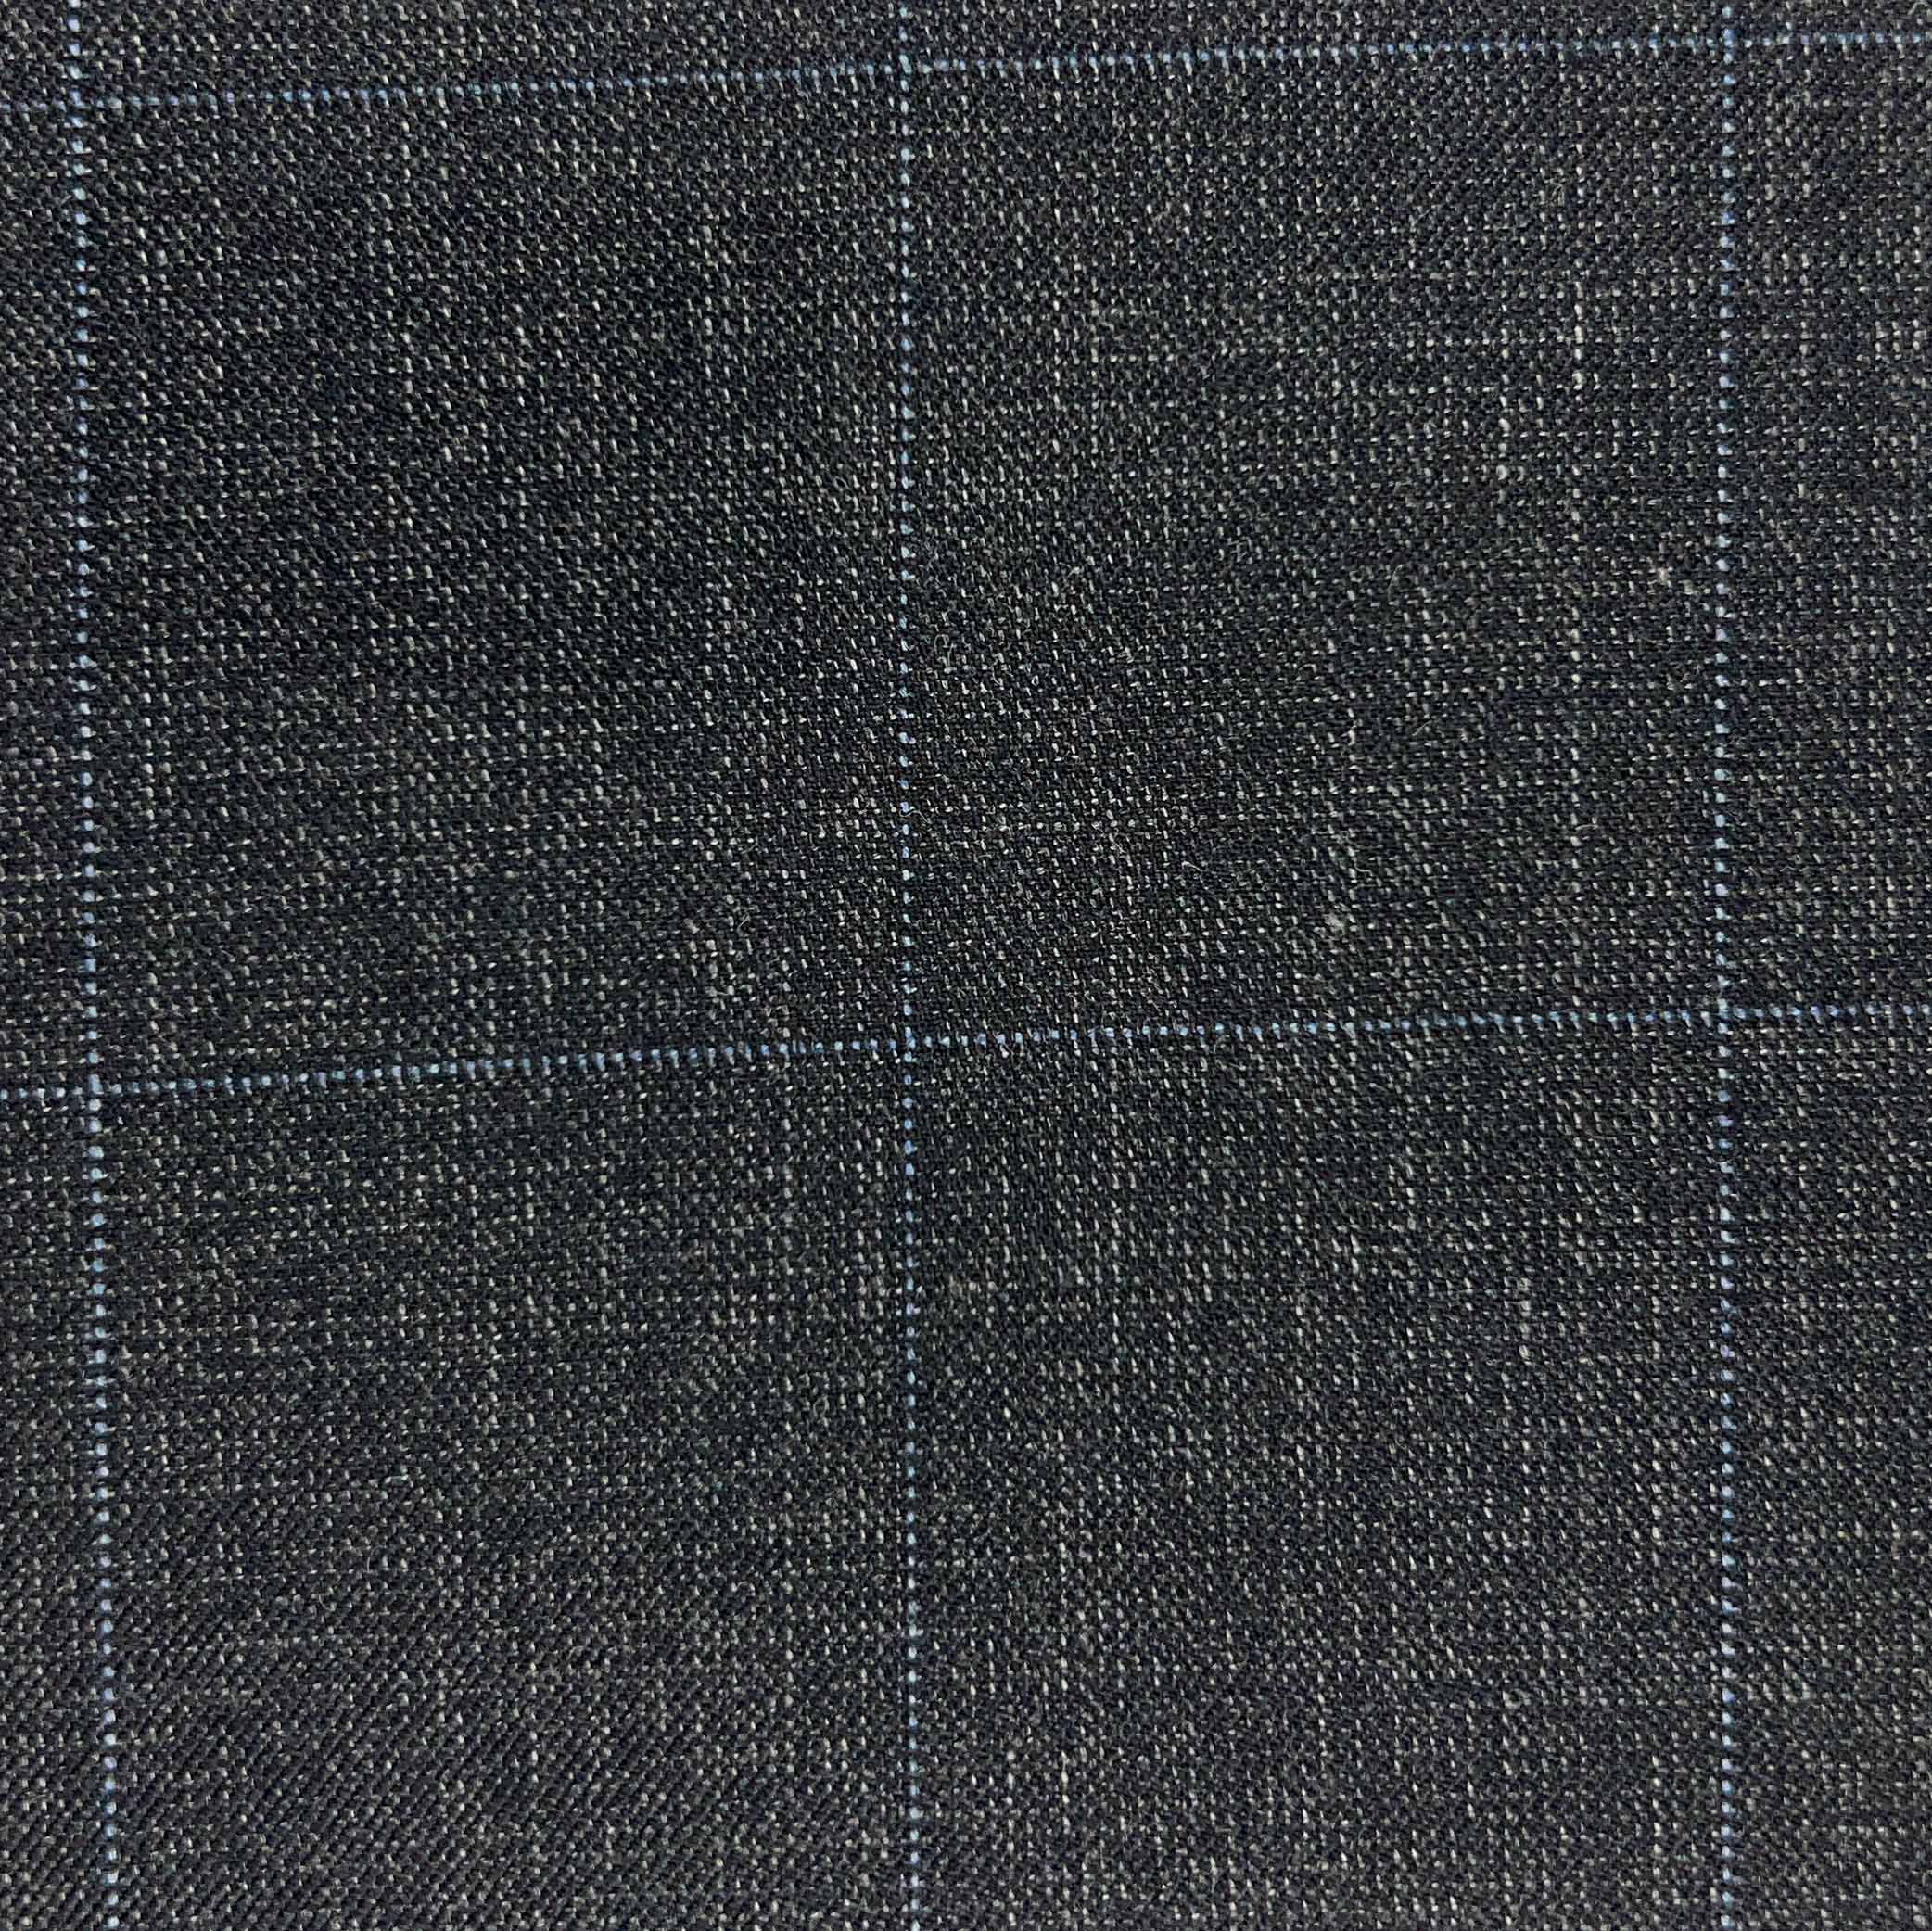 Westwood Hart Online Custom Hand Tailor Suits Sportcoats Trousers Waistcoats Overcoats Charcoal Black With Fine Blue Windowpane